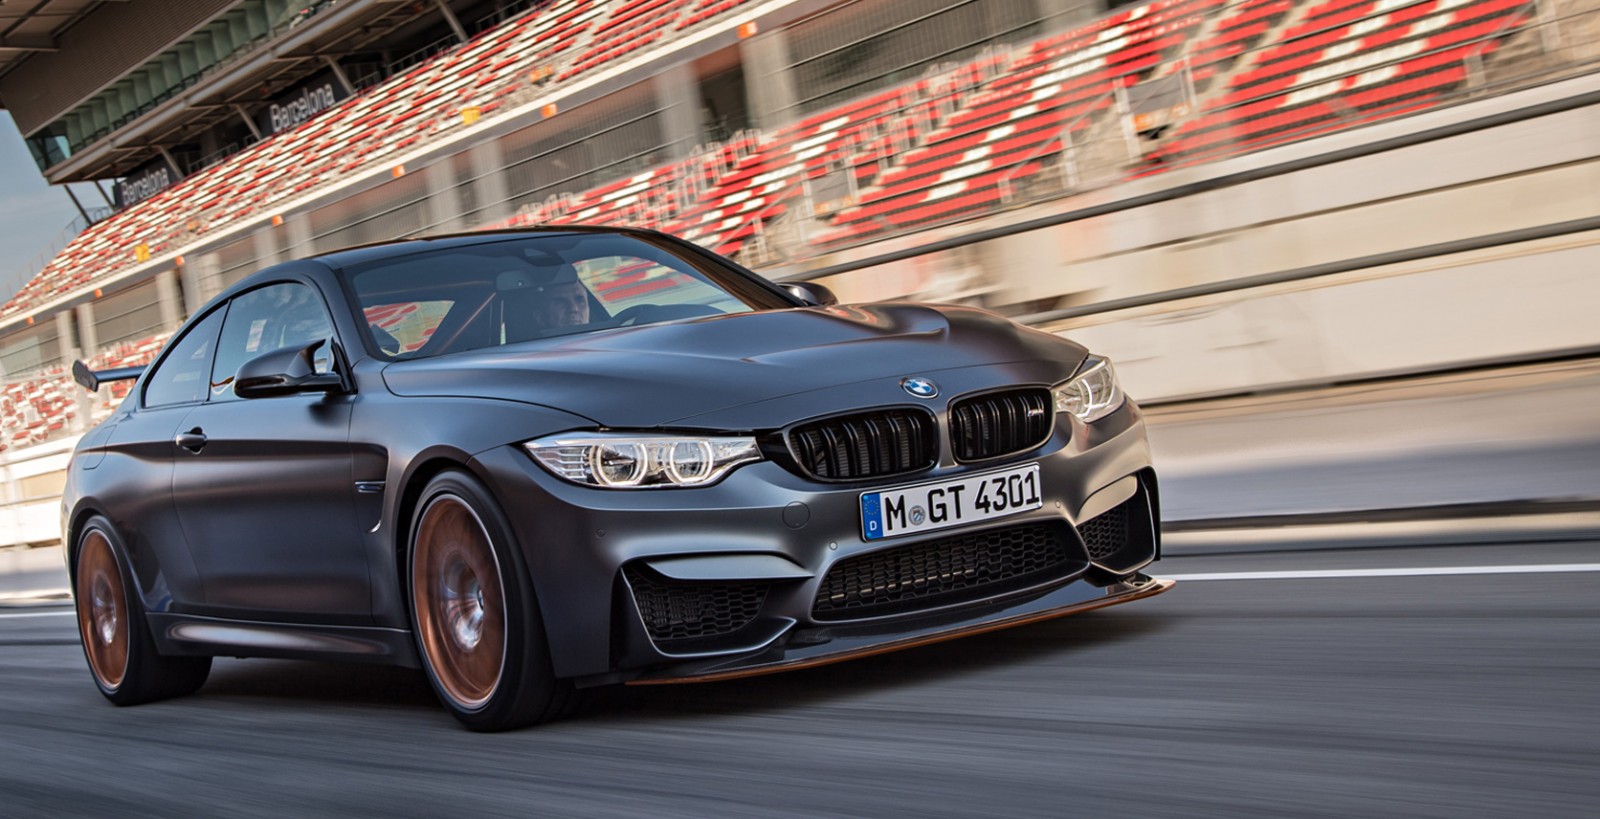 The BMW M4 GTS Is a Racecar You Can Own - Sharp Magazine